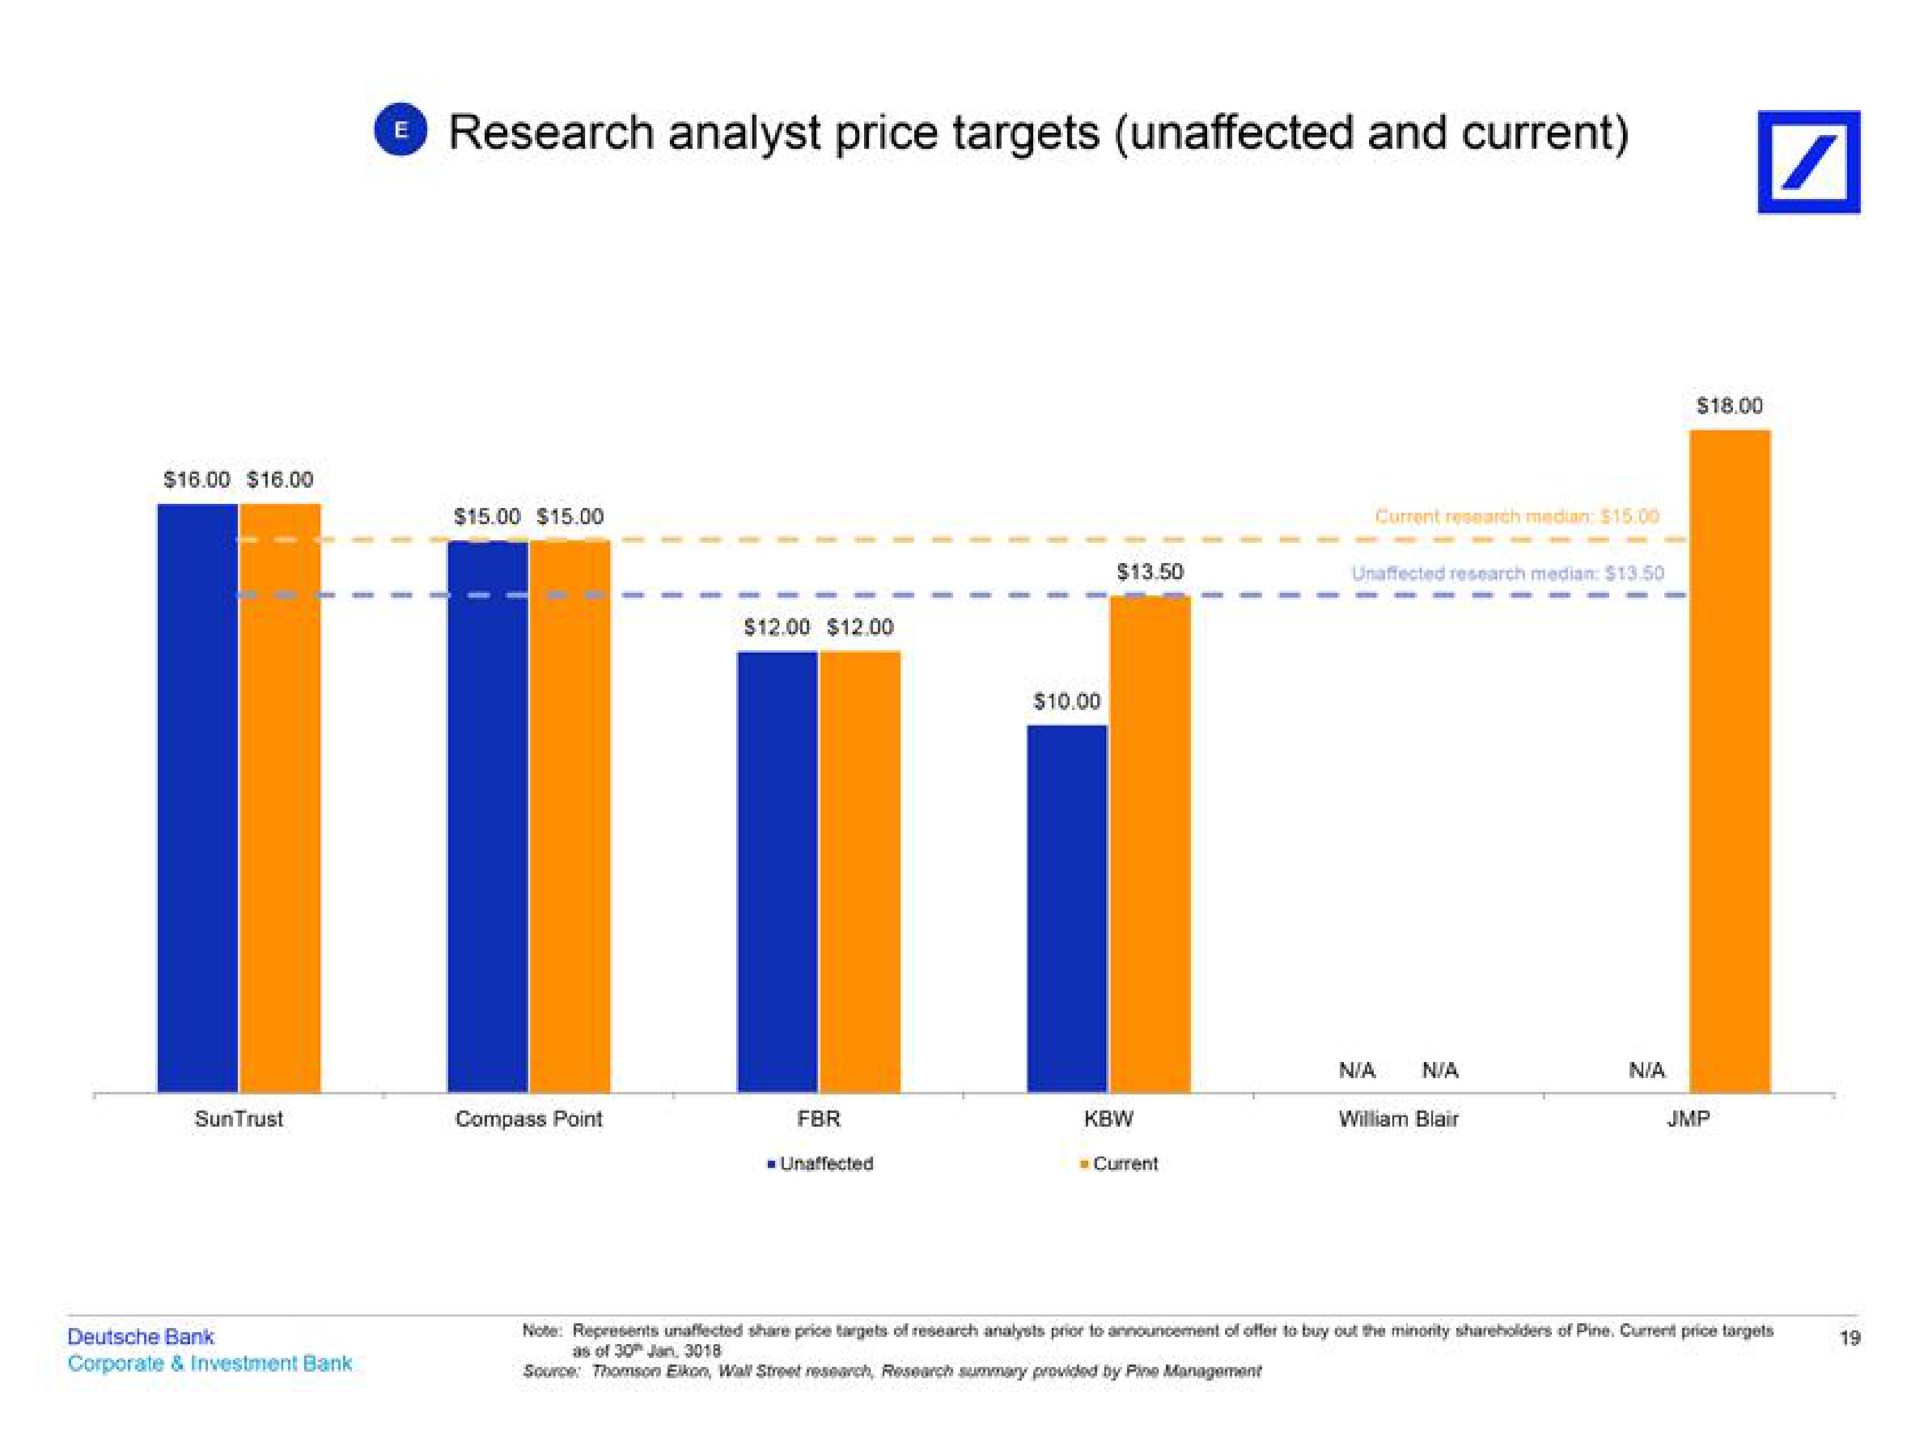 research analyst price targets unaffected and current | Deutsche Bank